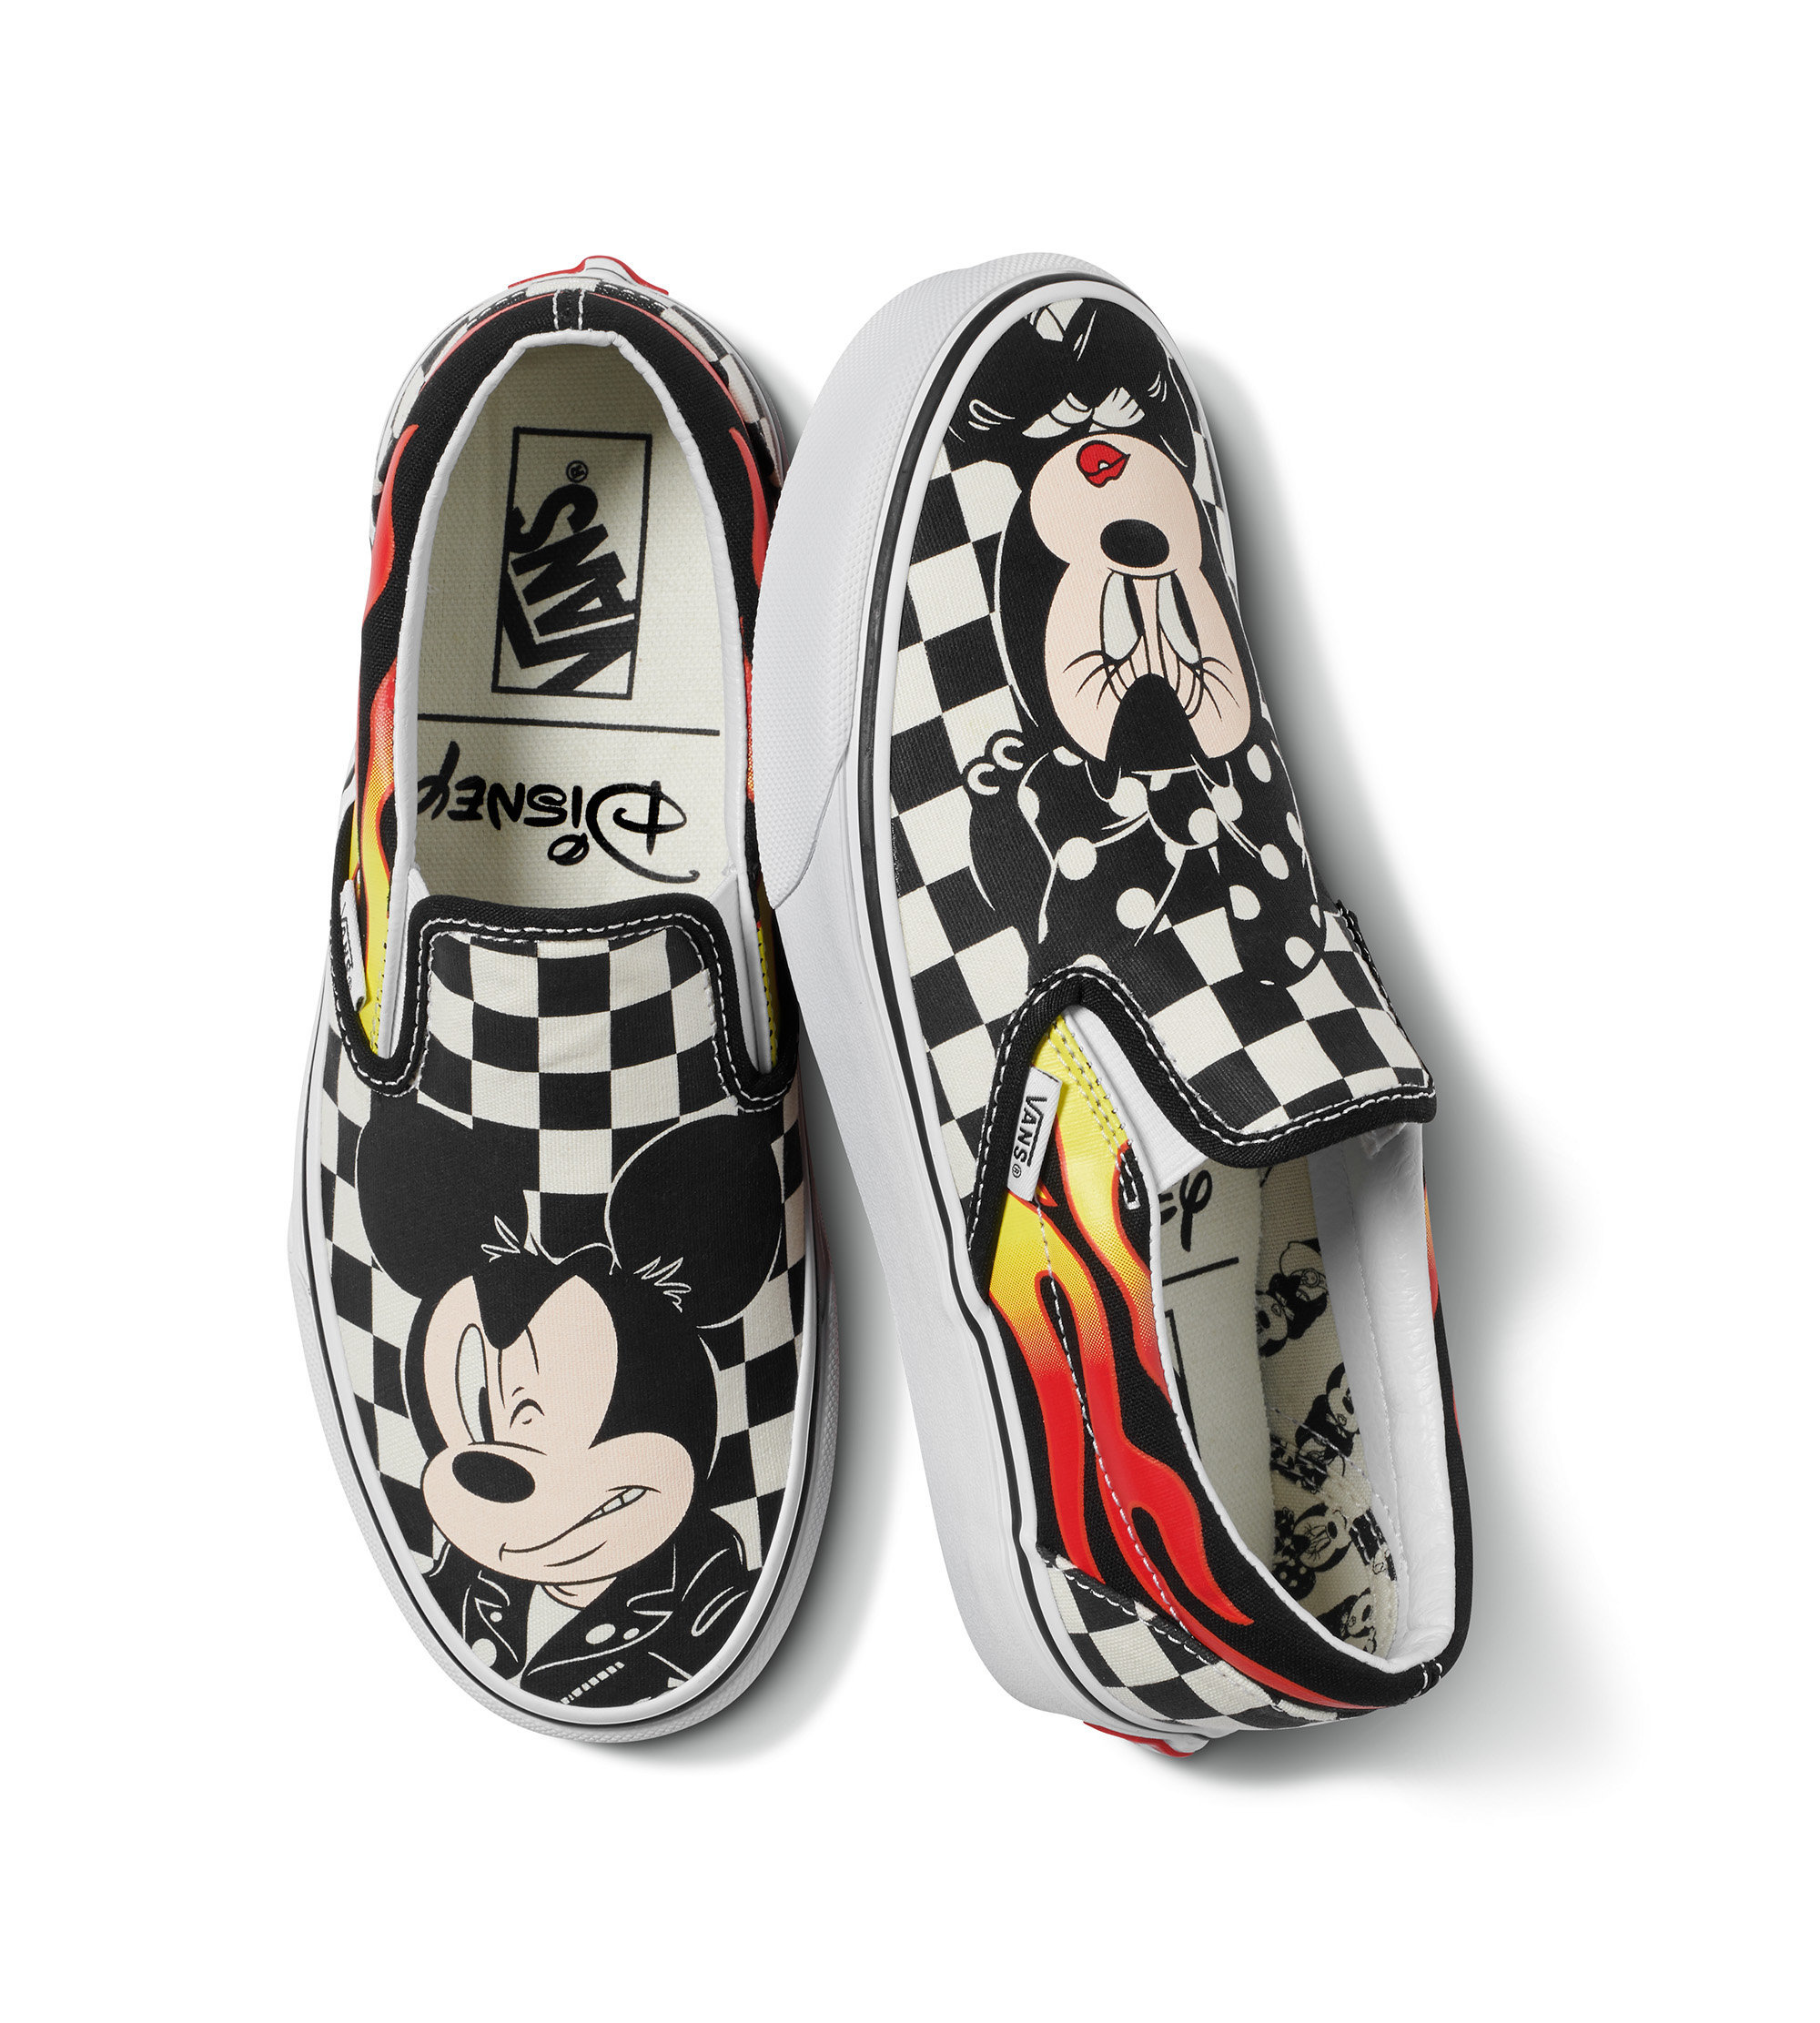 Disney Vans Launched In The UK To 